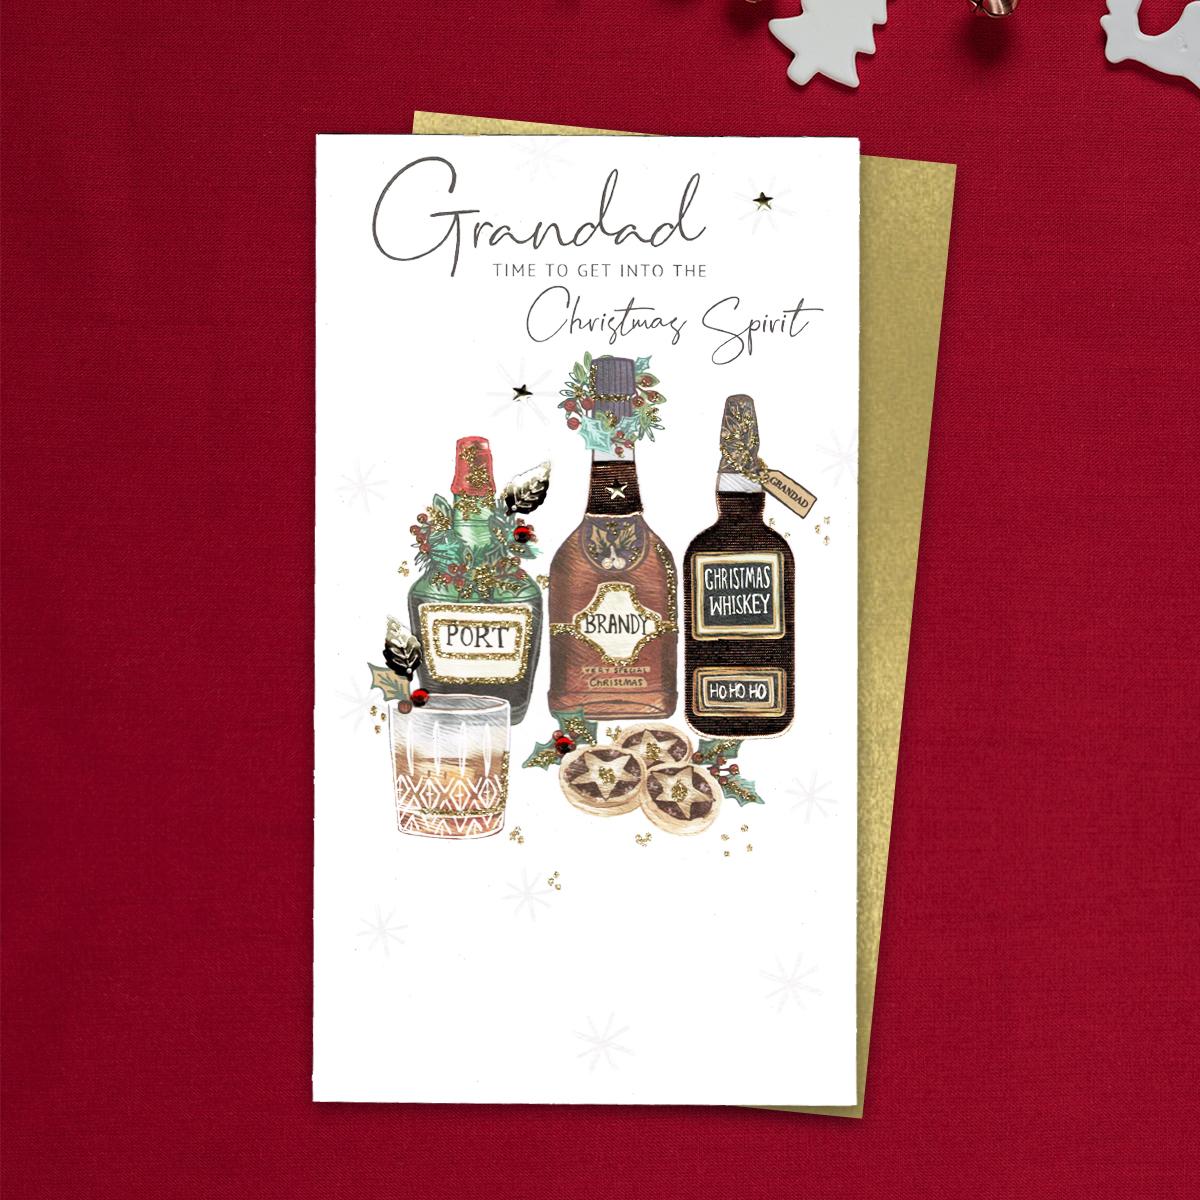 Grandad Time To Get Into The Christmas Spirit Featuring Bottles Of Port, Brandy And Whiskey. Hand Finished With Jewel Embellishments. Completed with a Gold Coloured Envelope